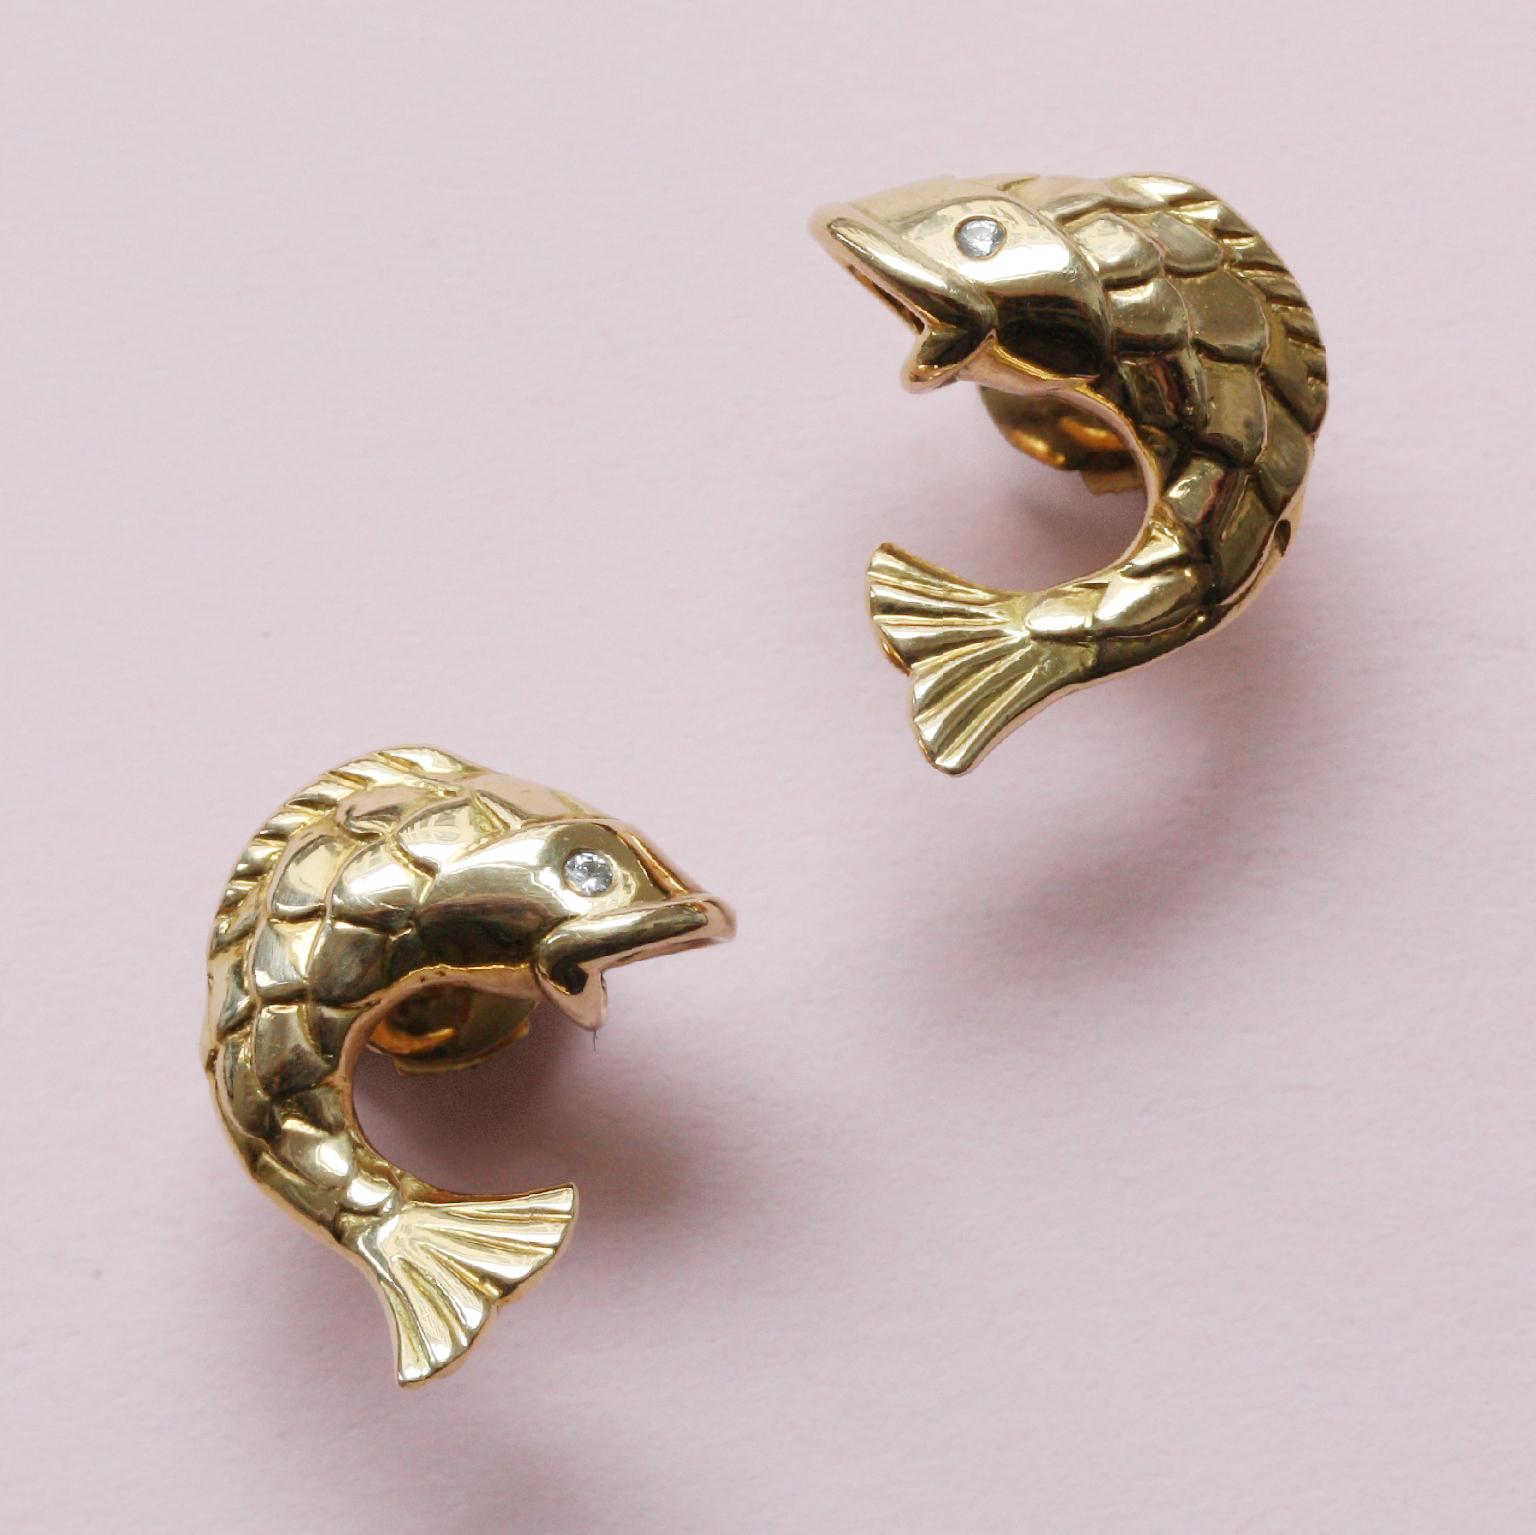 A pair of 18 carat gold earrings in the shape of little fishm signed and numbered: Mellerio, France.

weight: 9.98 grams